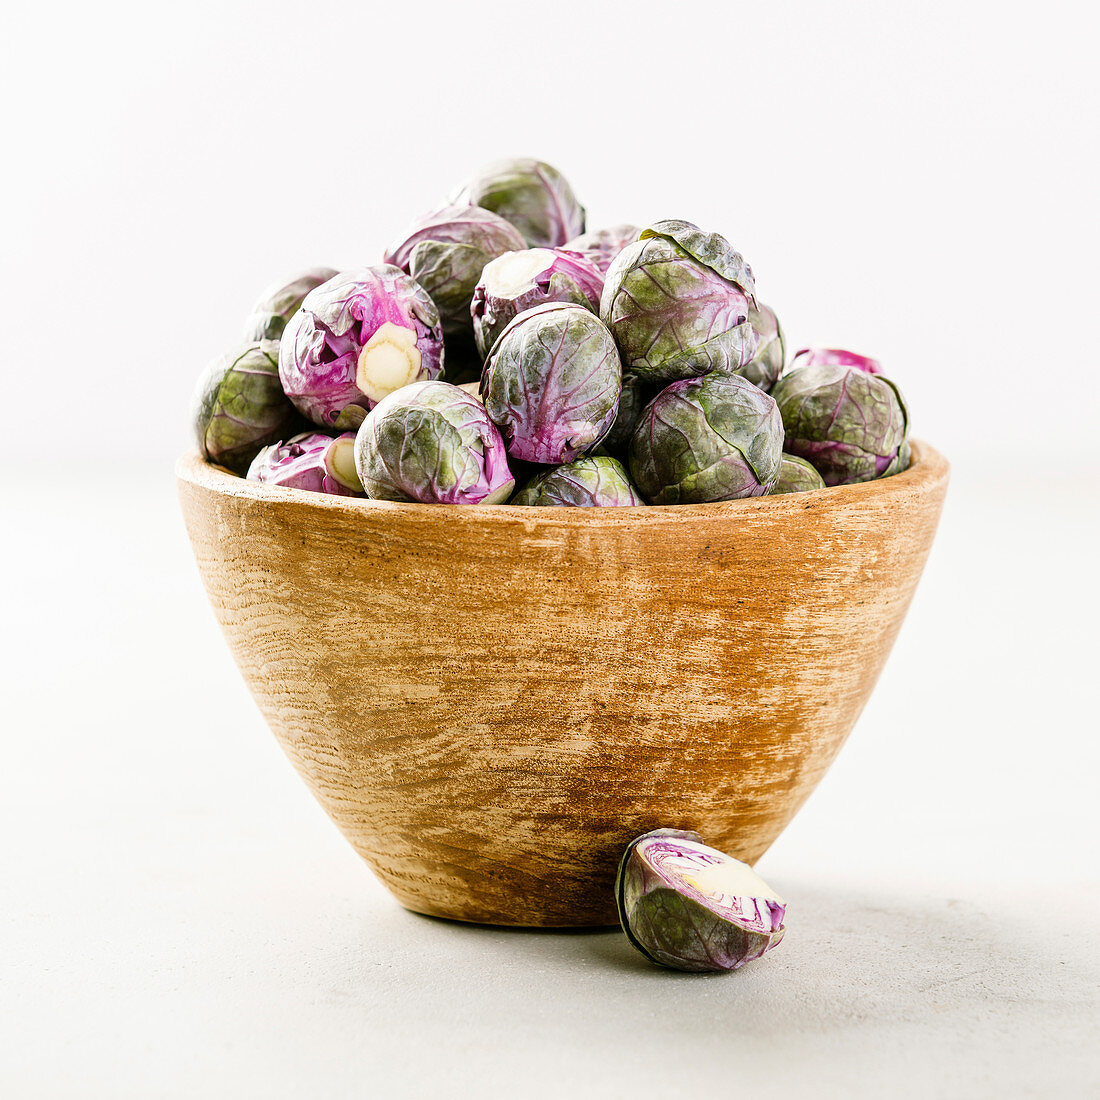 Purple Brussels sprouts in a wooden bowl on concrete background